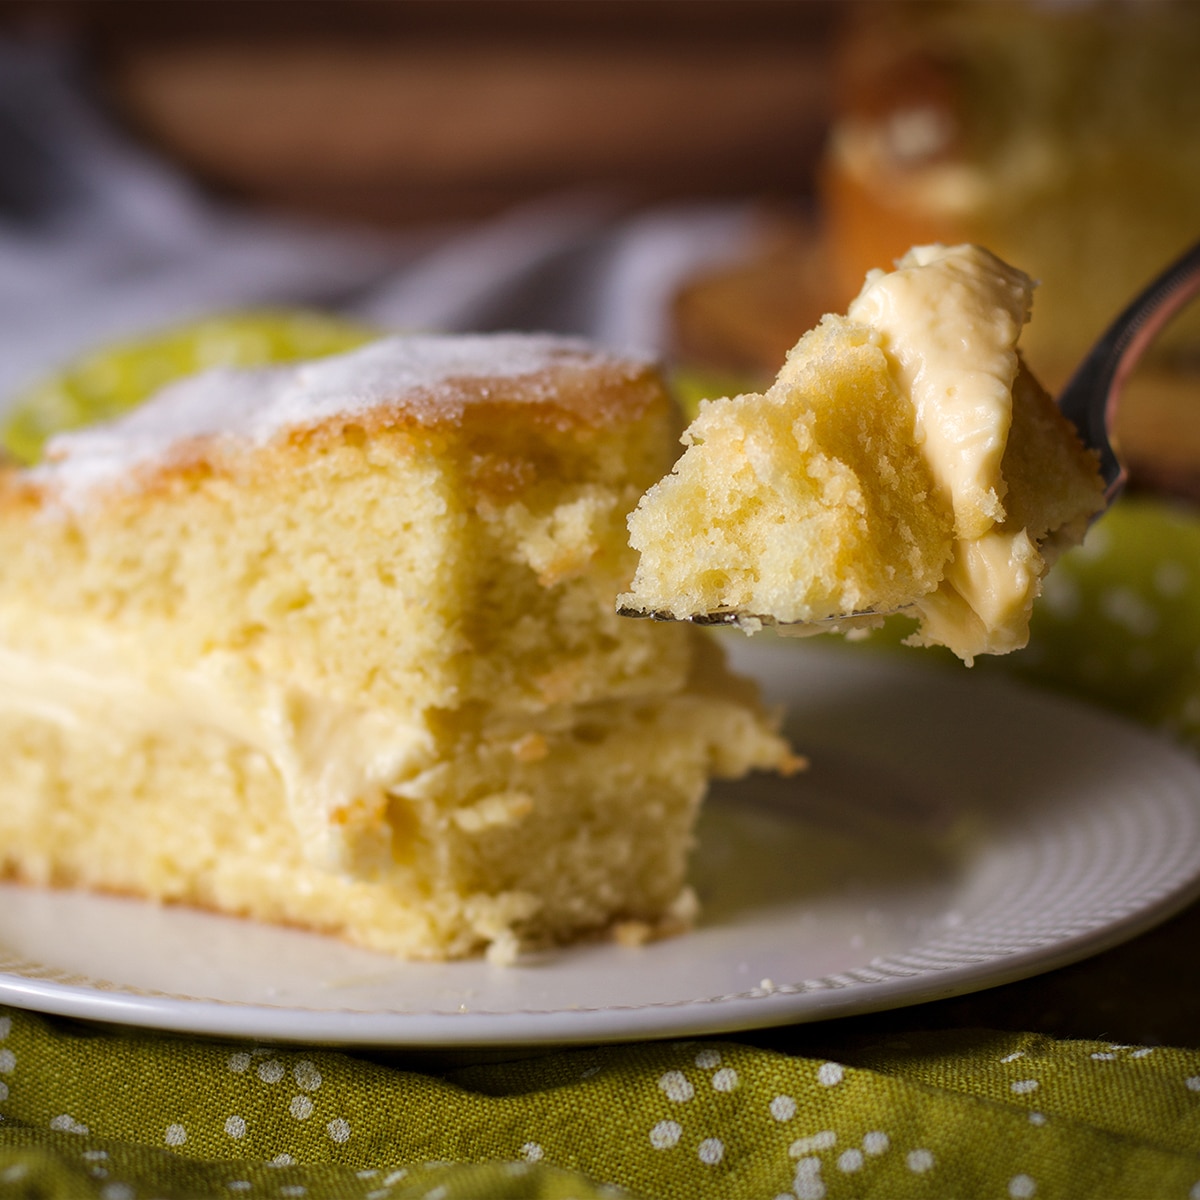 Someone cutting a bite of olive oil cake from a slice on a plate.